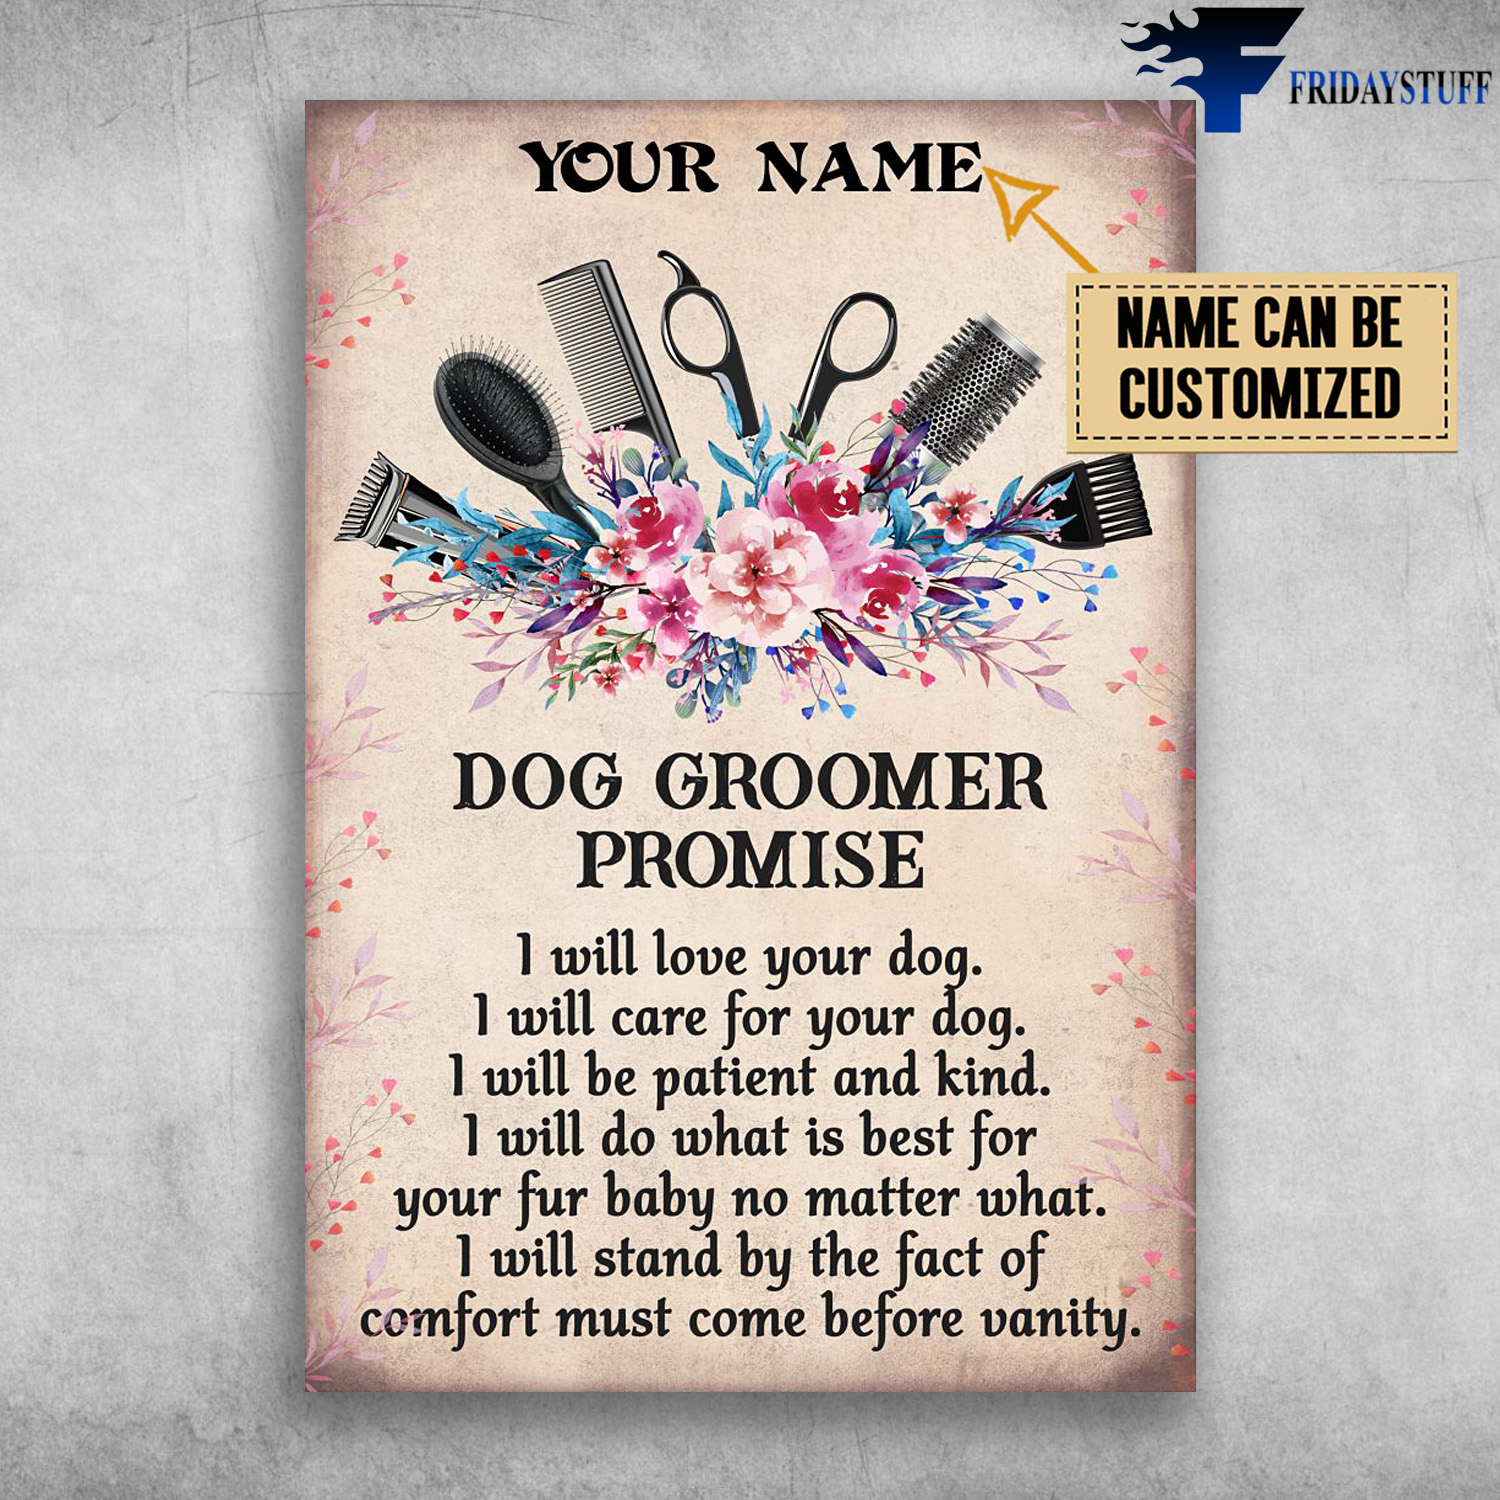 Dog Groomer Tools, Dog Groomer Promise, I Will Love Your Dog, I Will Care For Your Dog, I Will Be Patient And Kind, I Will Do What I Best For Your Fur Baby No Matter What, I Will Stand By The Fact Of Comfort Must Come Before Vanity